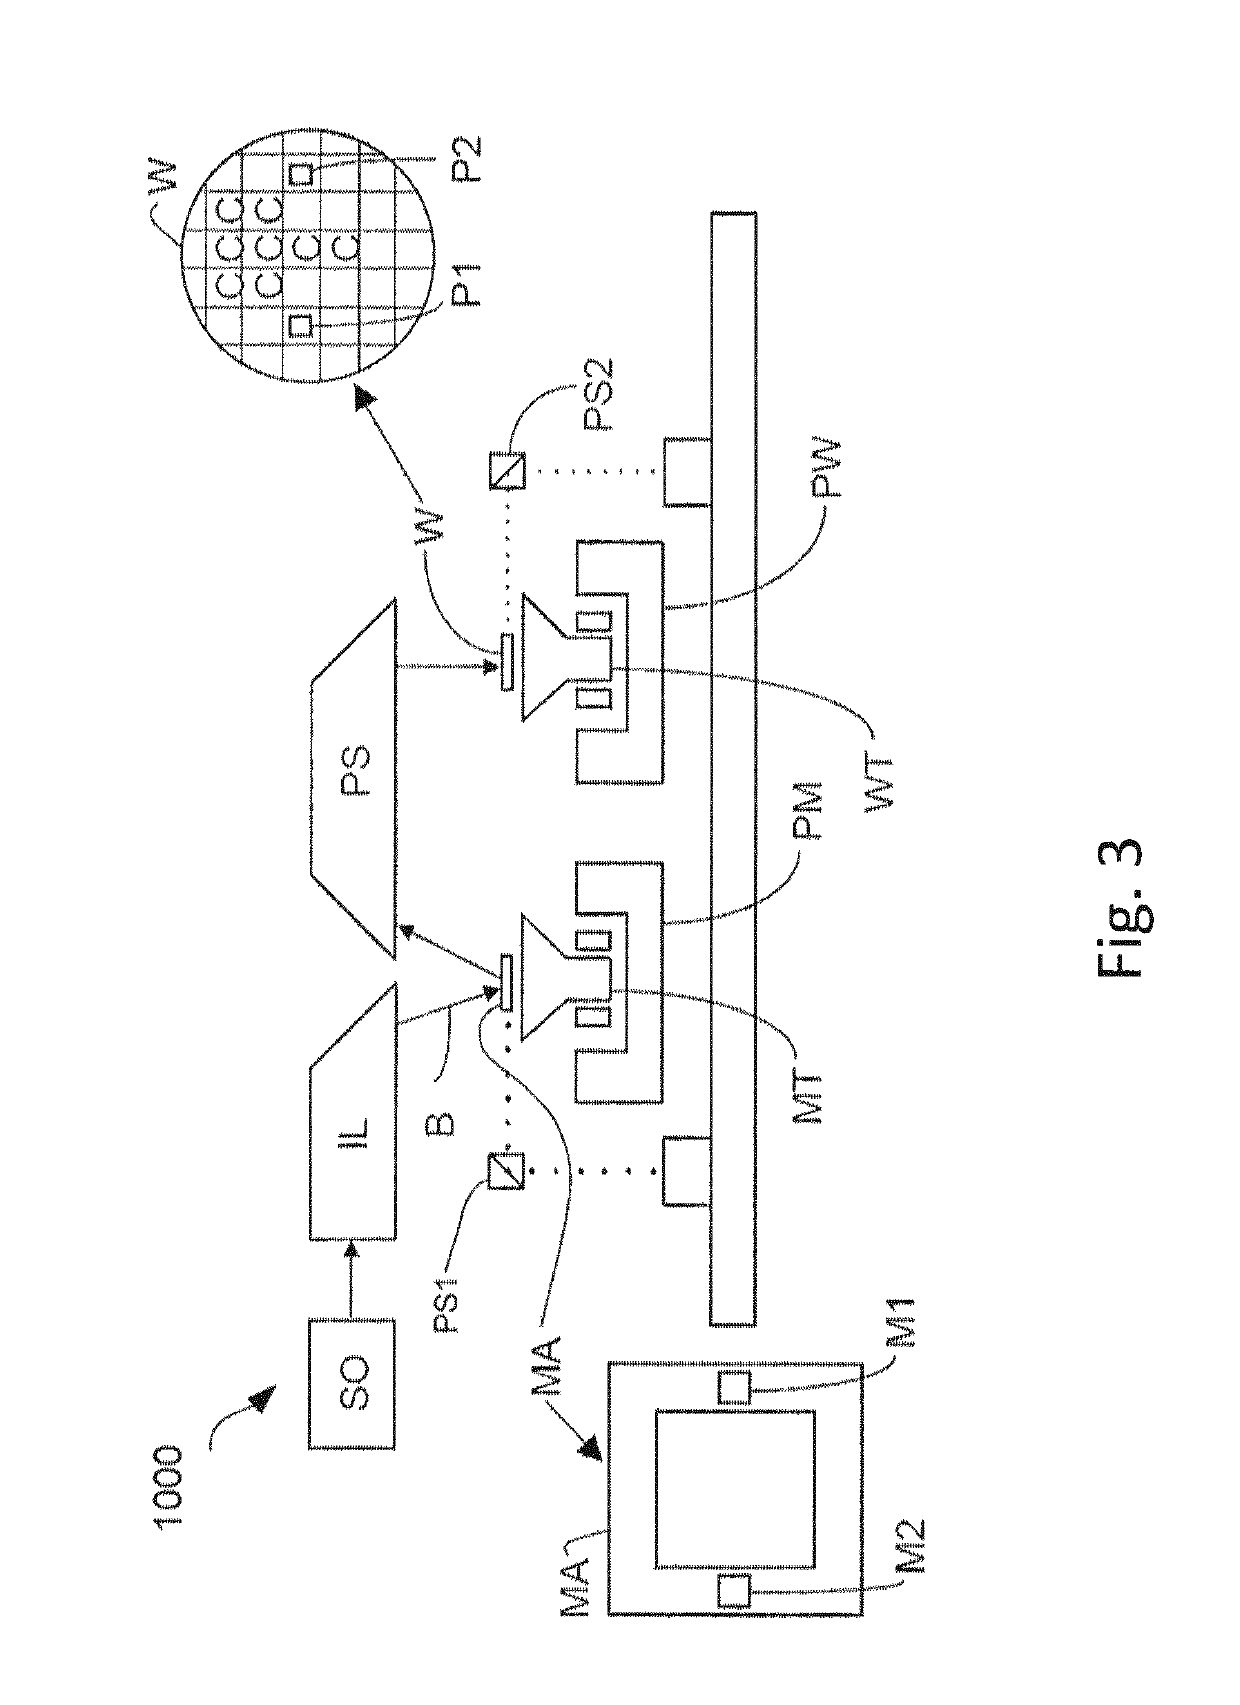 Lithography model for three-dimensional patterning device